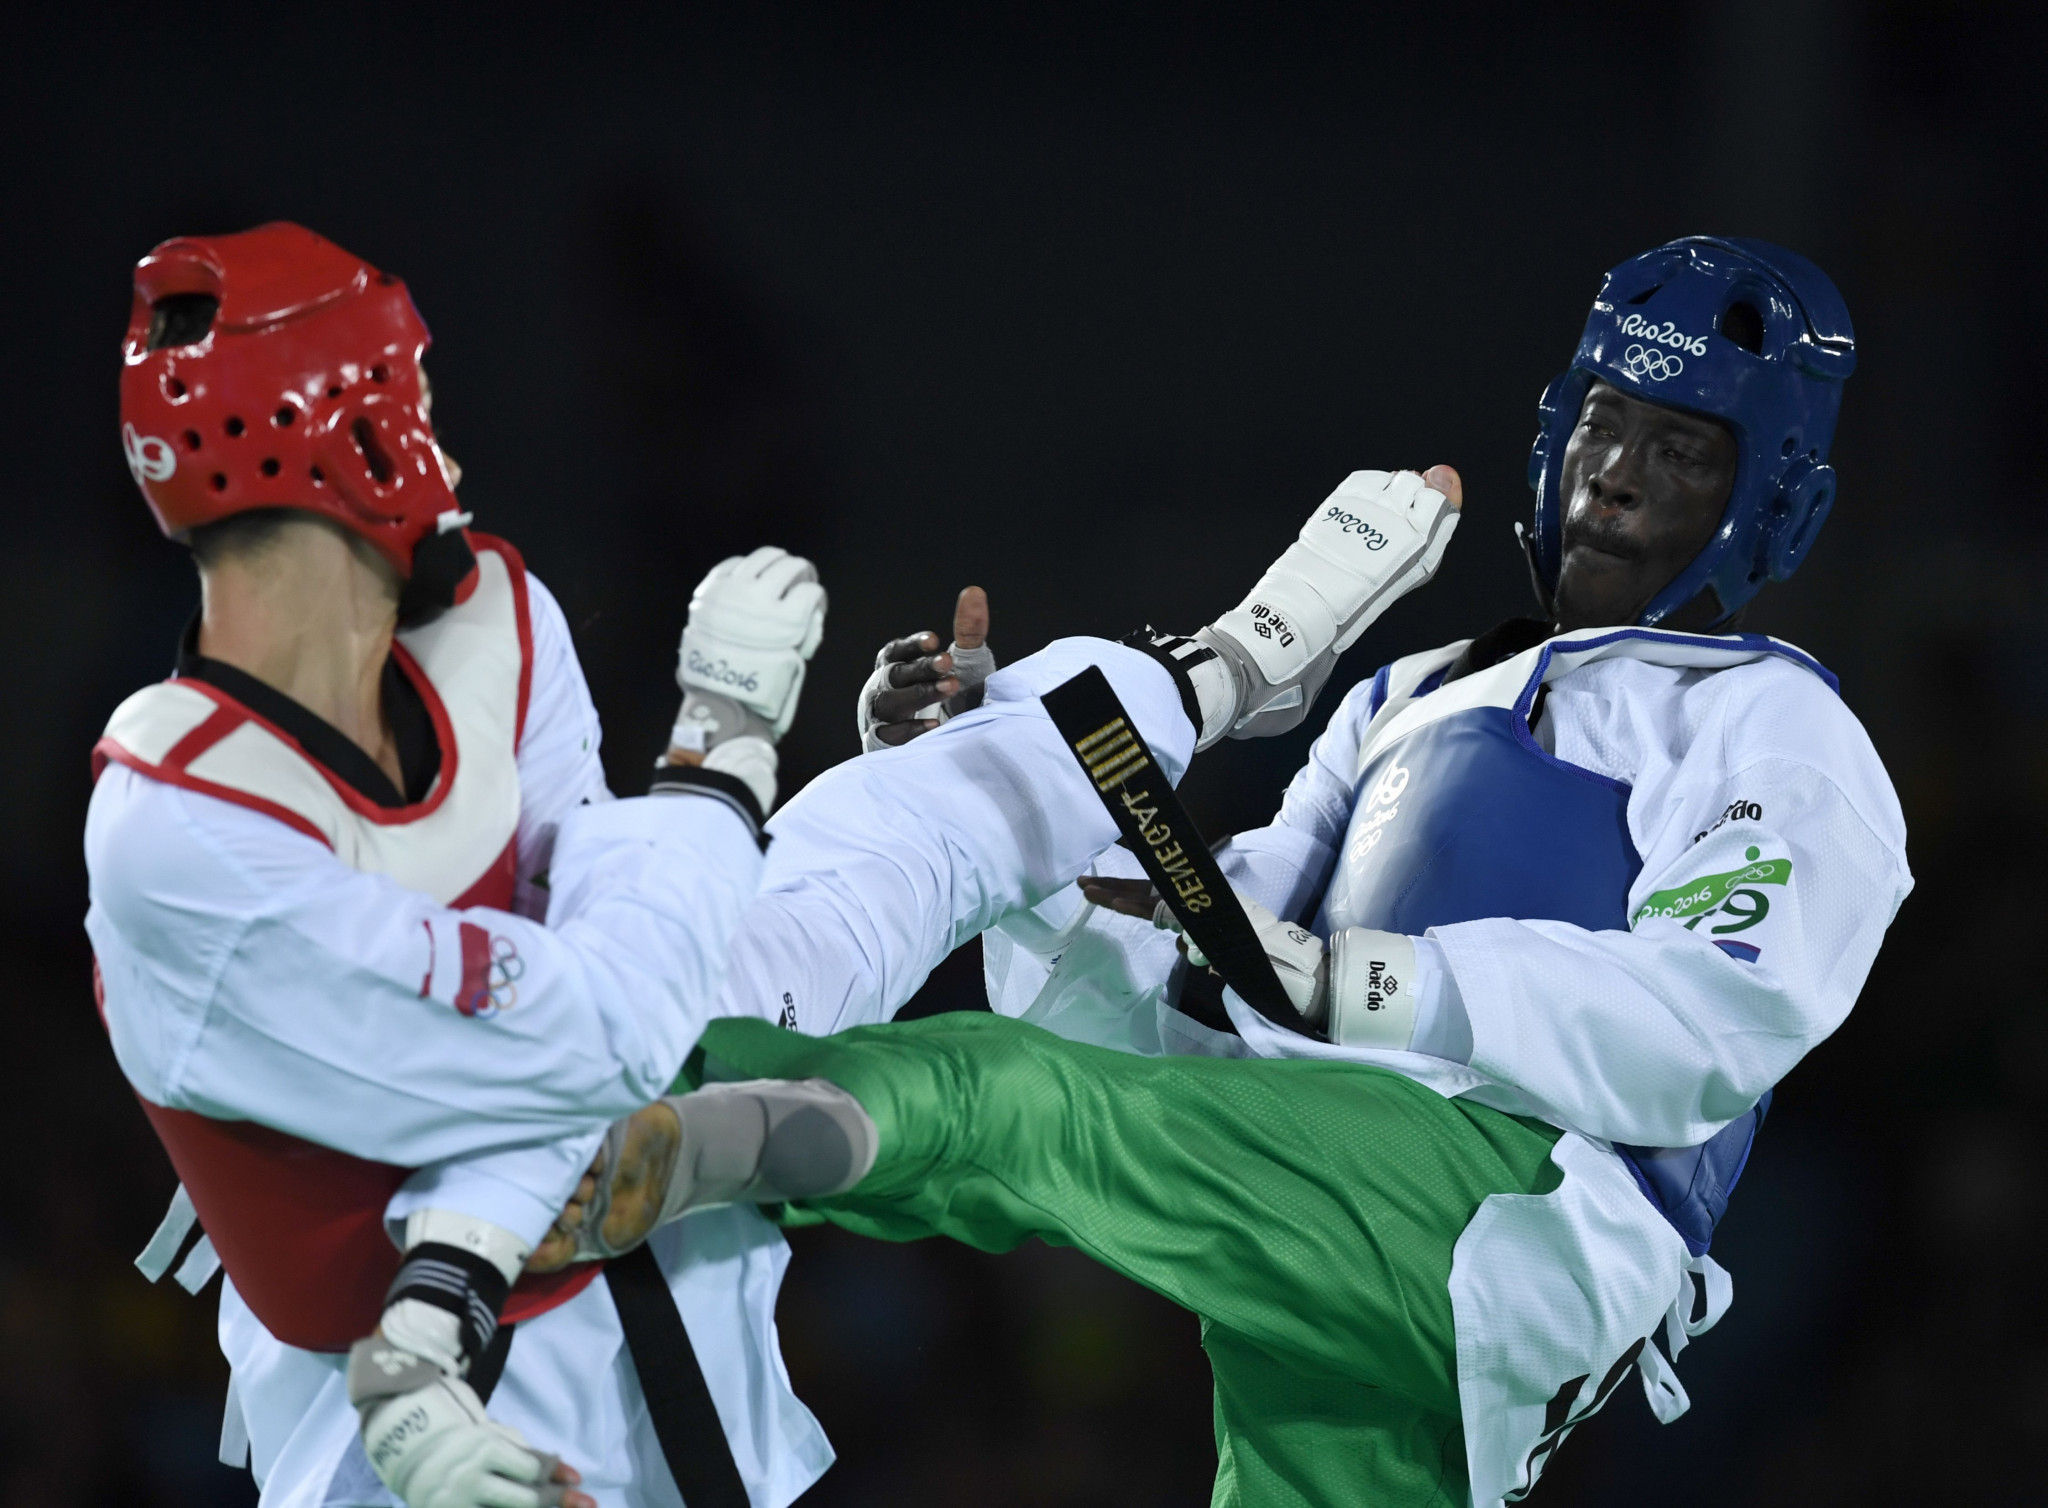 Balla Dièye, right, represented Senegal at the Rio 2016 Olympics but is now leading the Organising Committee for the African Taekwondo Championships ©Getty Images
